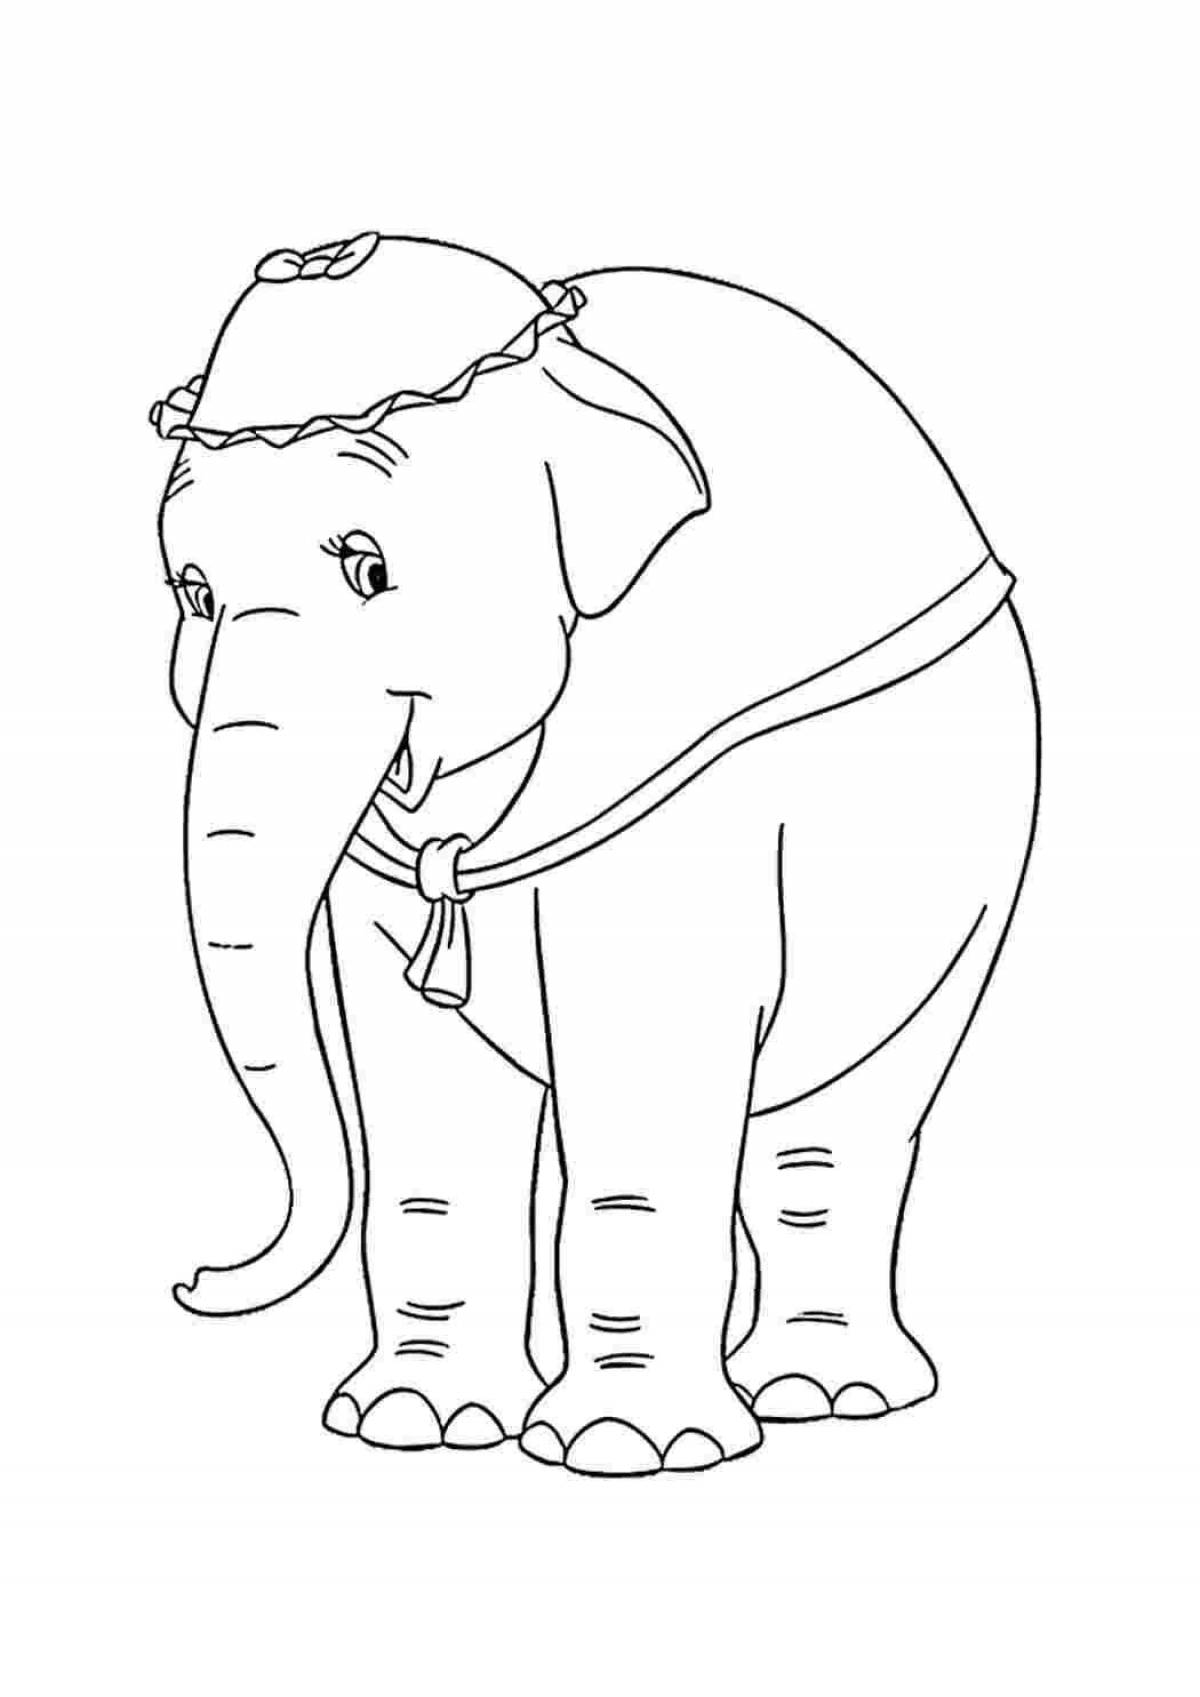 Bright jumbo coloring page